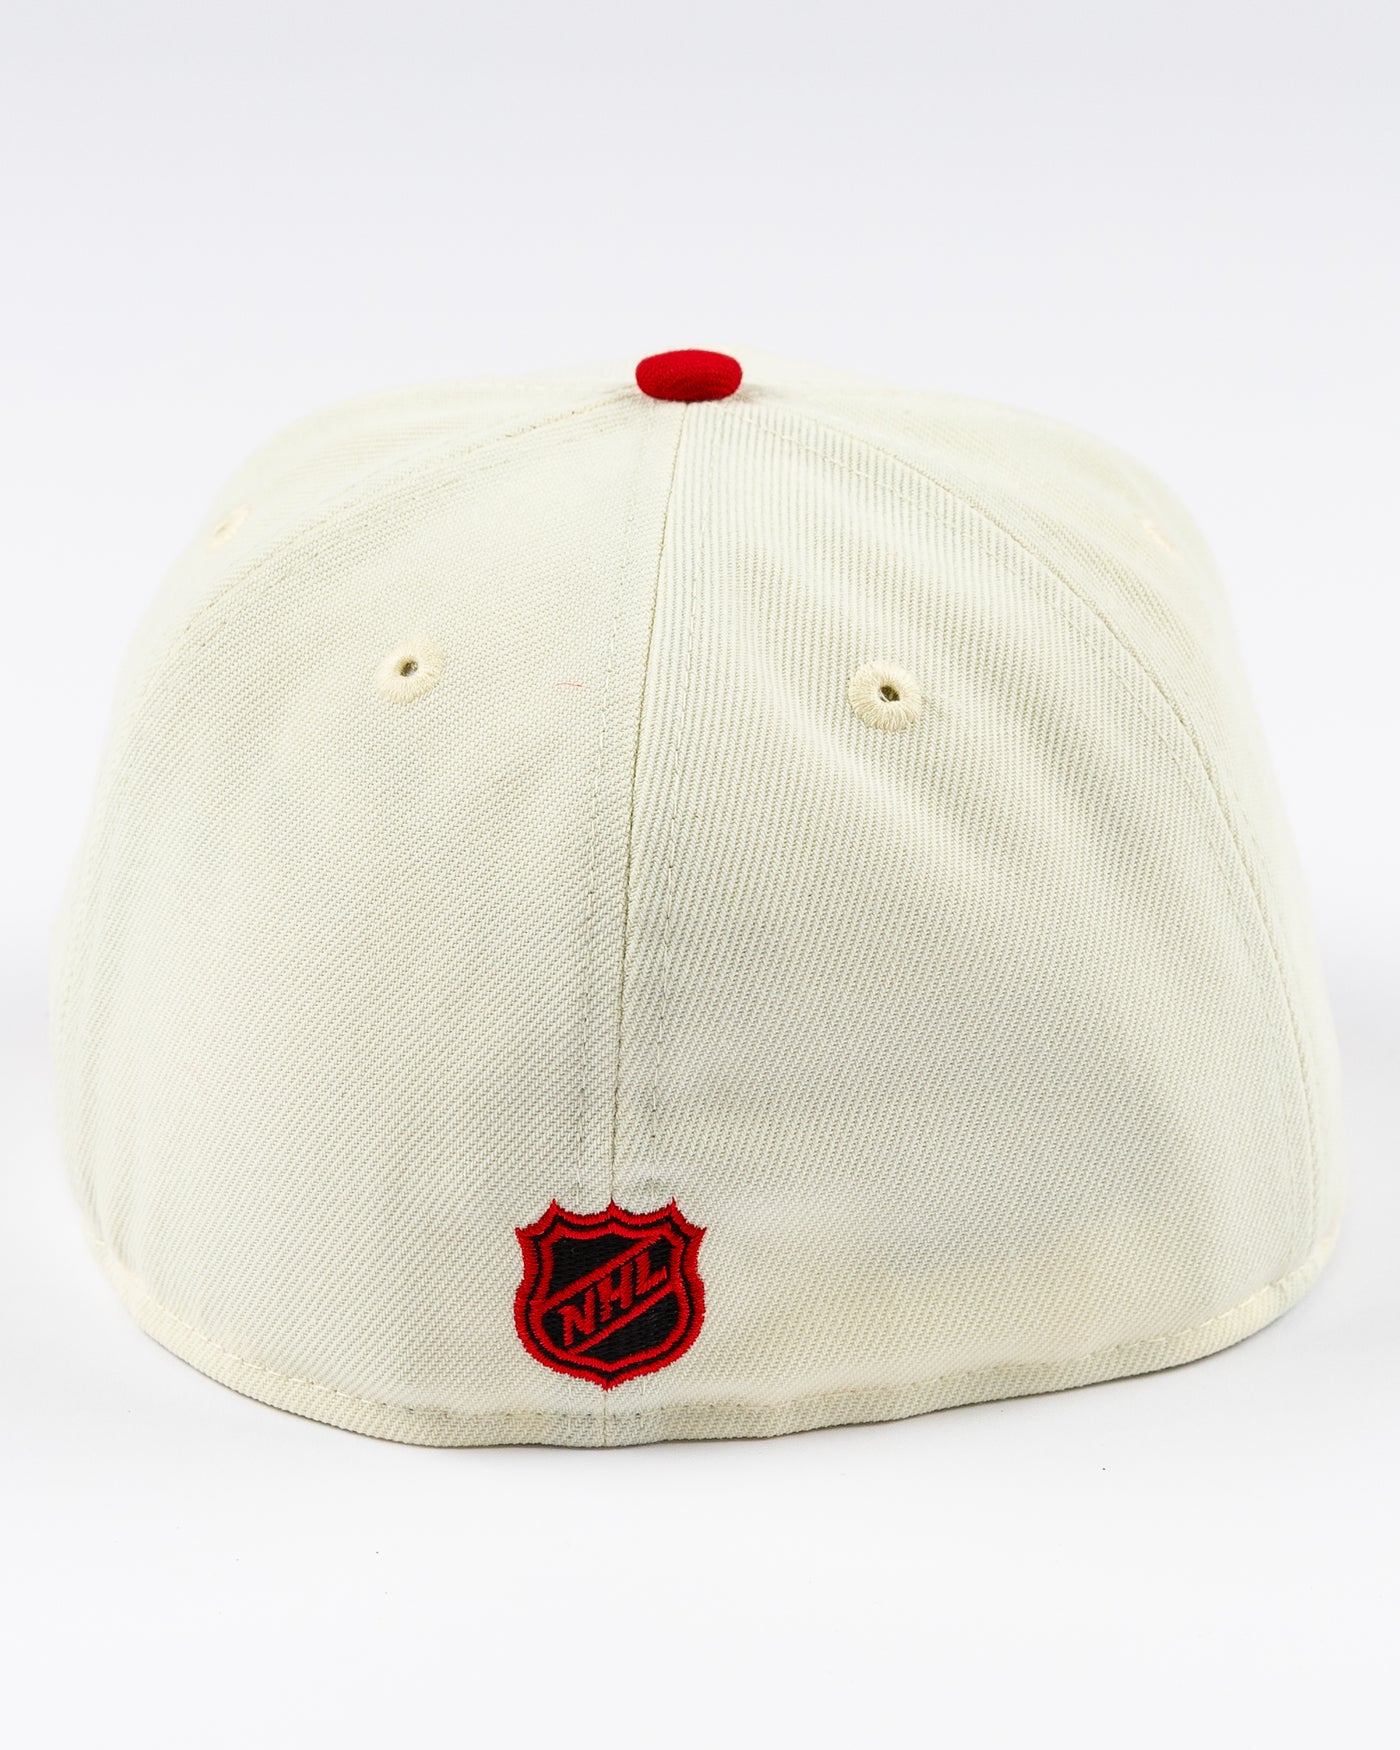 cream and red two tone fitted New Era 59FIFTY cap with embroidered Chicago Blackhawks primary logo on front - back lay flat